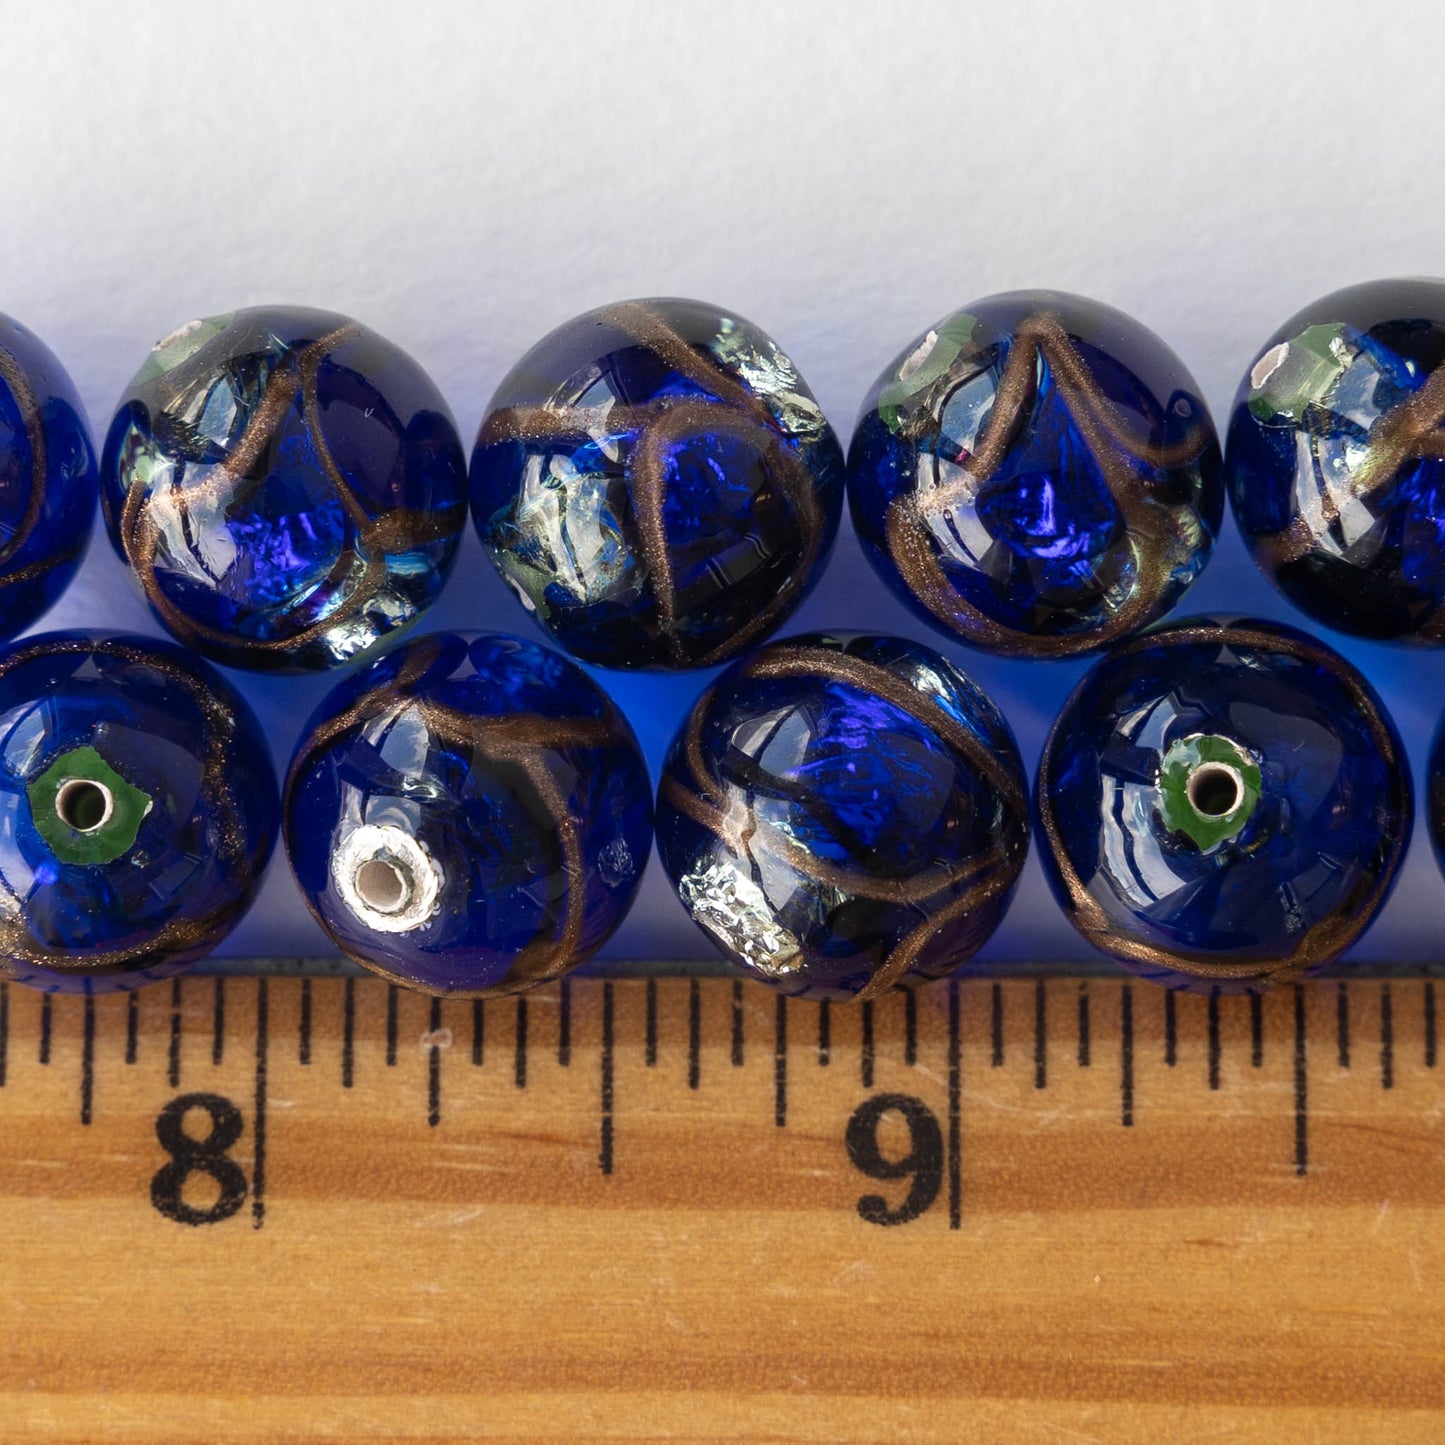 Load image into Gallery viewer, 14mm Handmade Lampwork Foil Beads - Cobalt Blue - 2, 4 or 8
